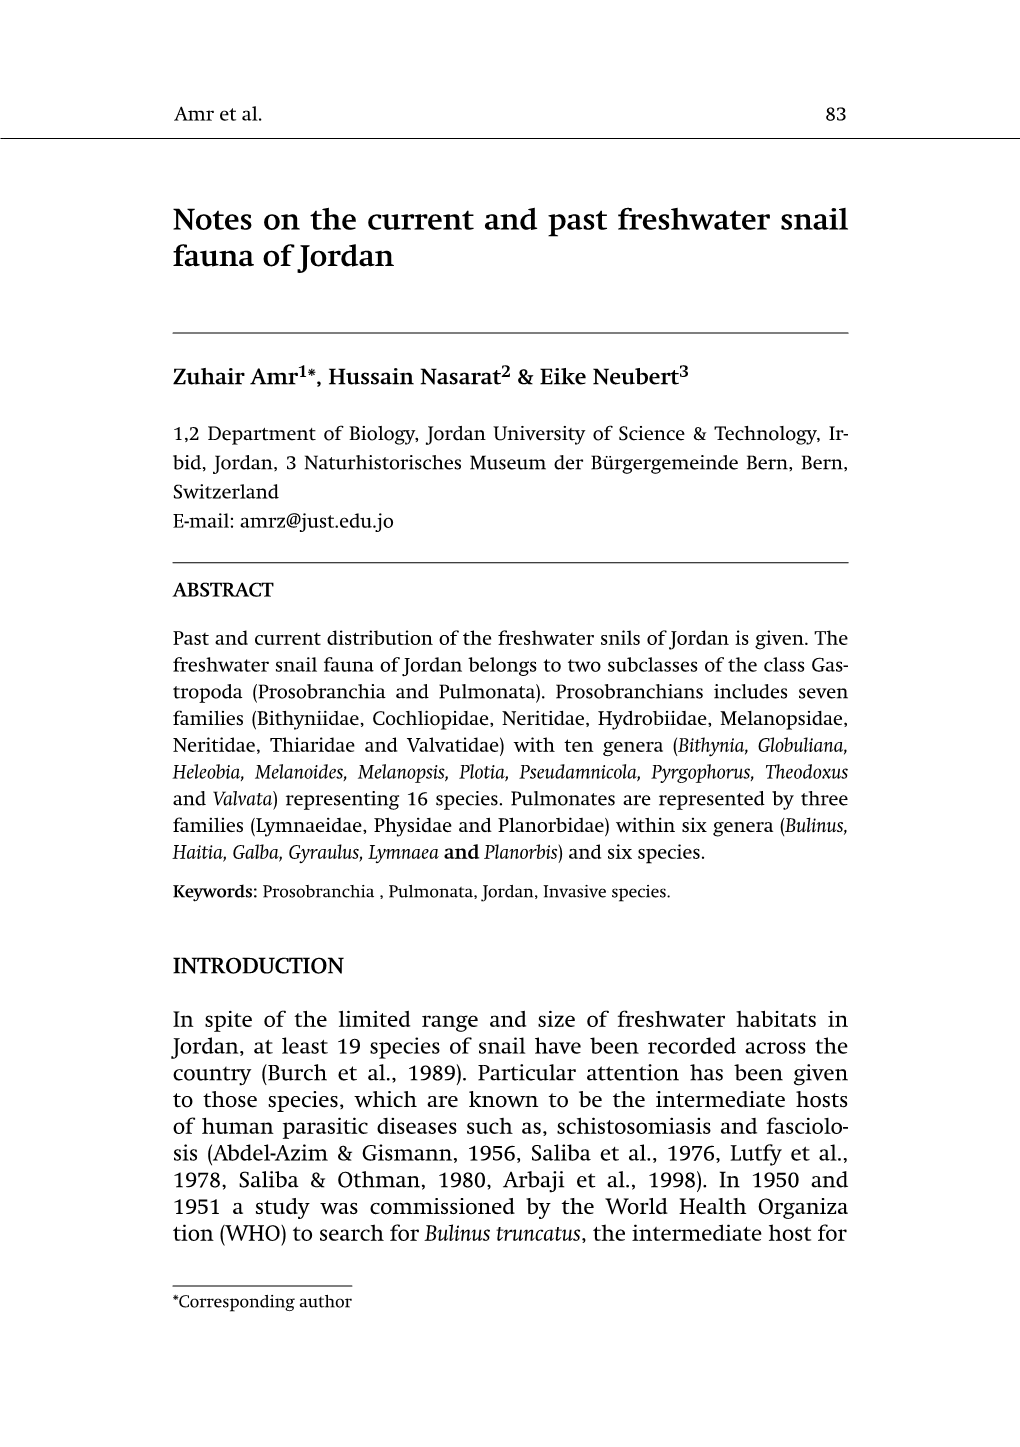 Notes on the Current and Past Freshwater Snail Fauna of Jordan